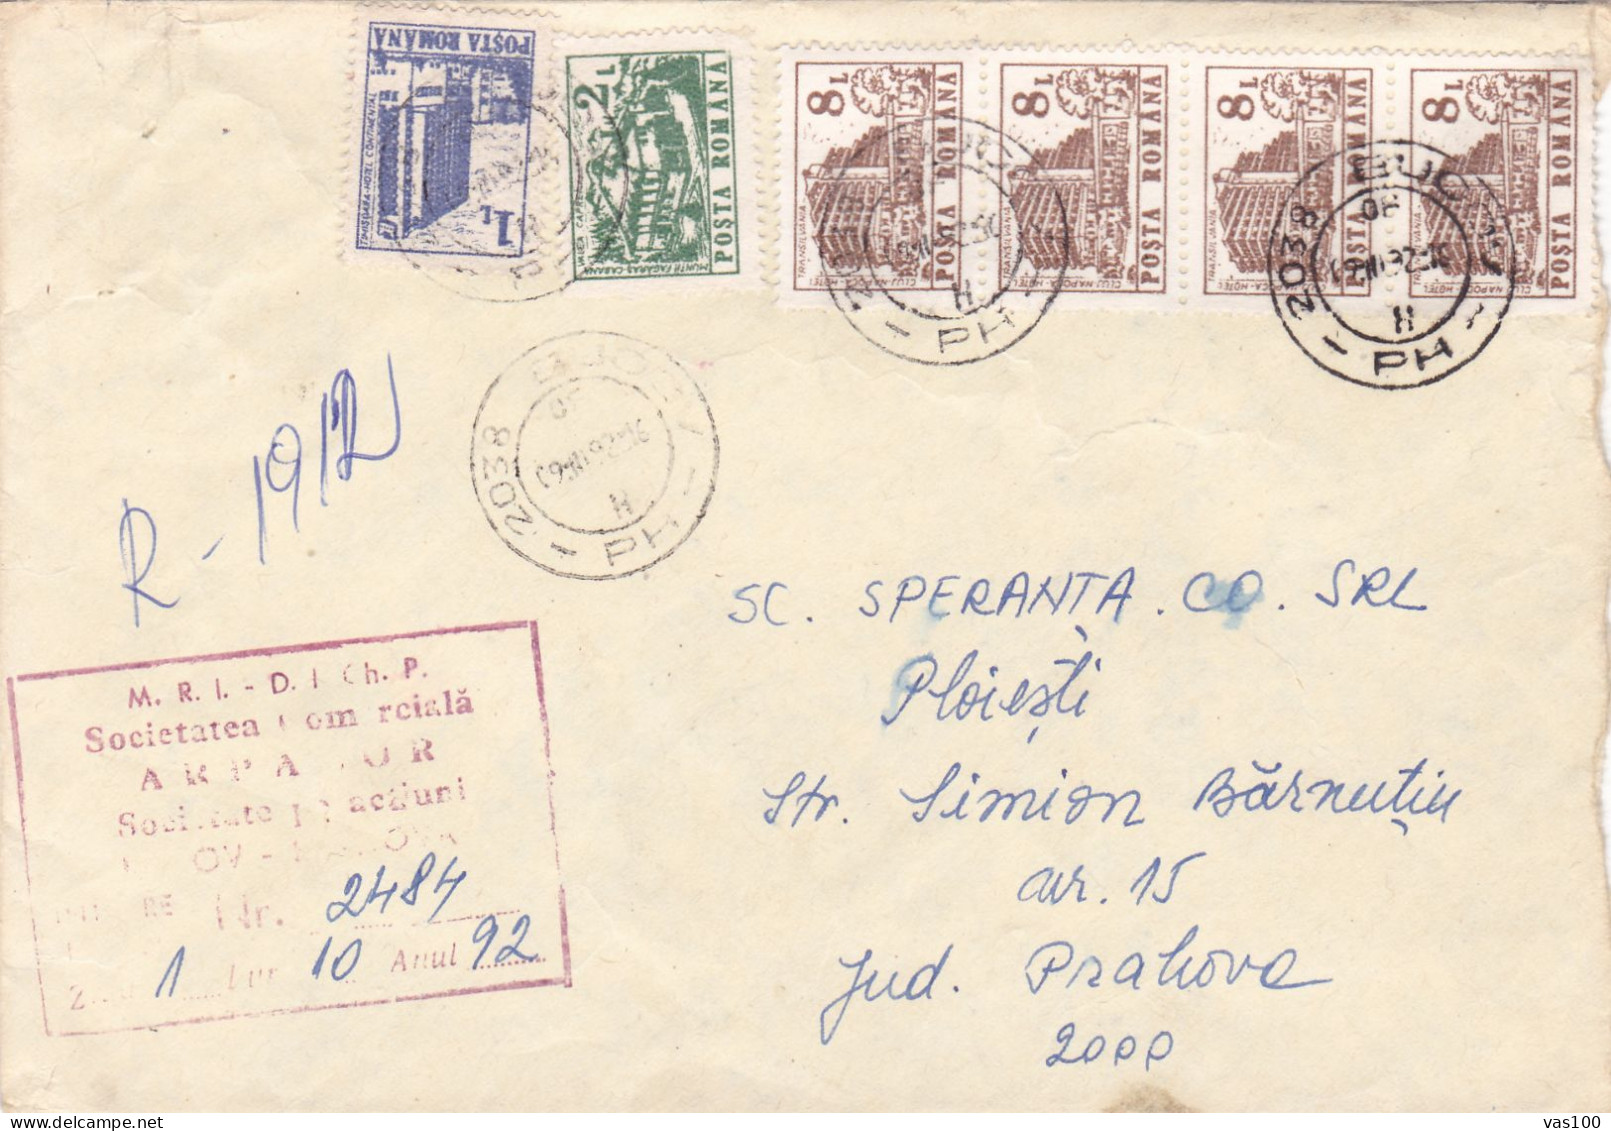 BEAUTIFUL STAMPED ENVELOPE  COVERS NICE FRANKING , 1979  ROMANIA - Covers & Documents